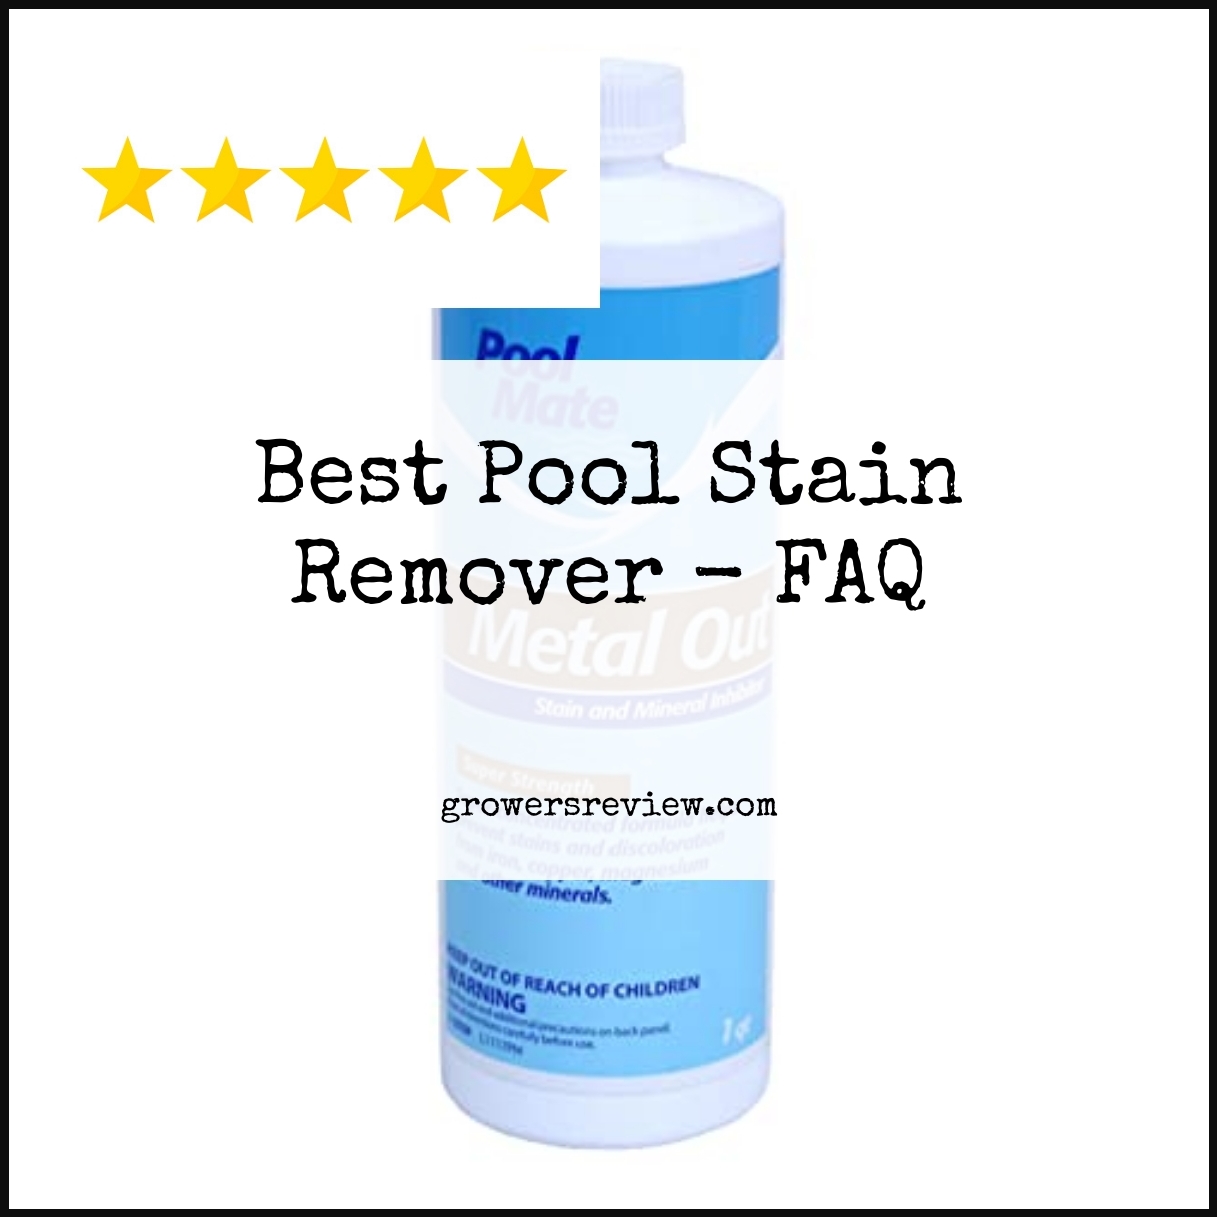 Best Pool Stain Remover - FAQ